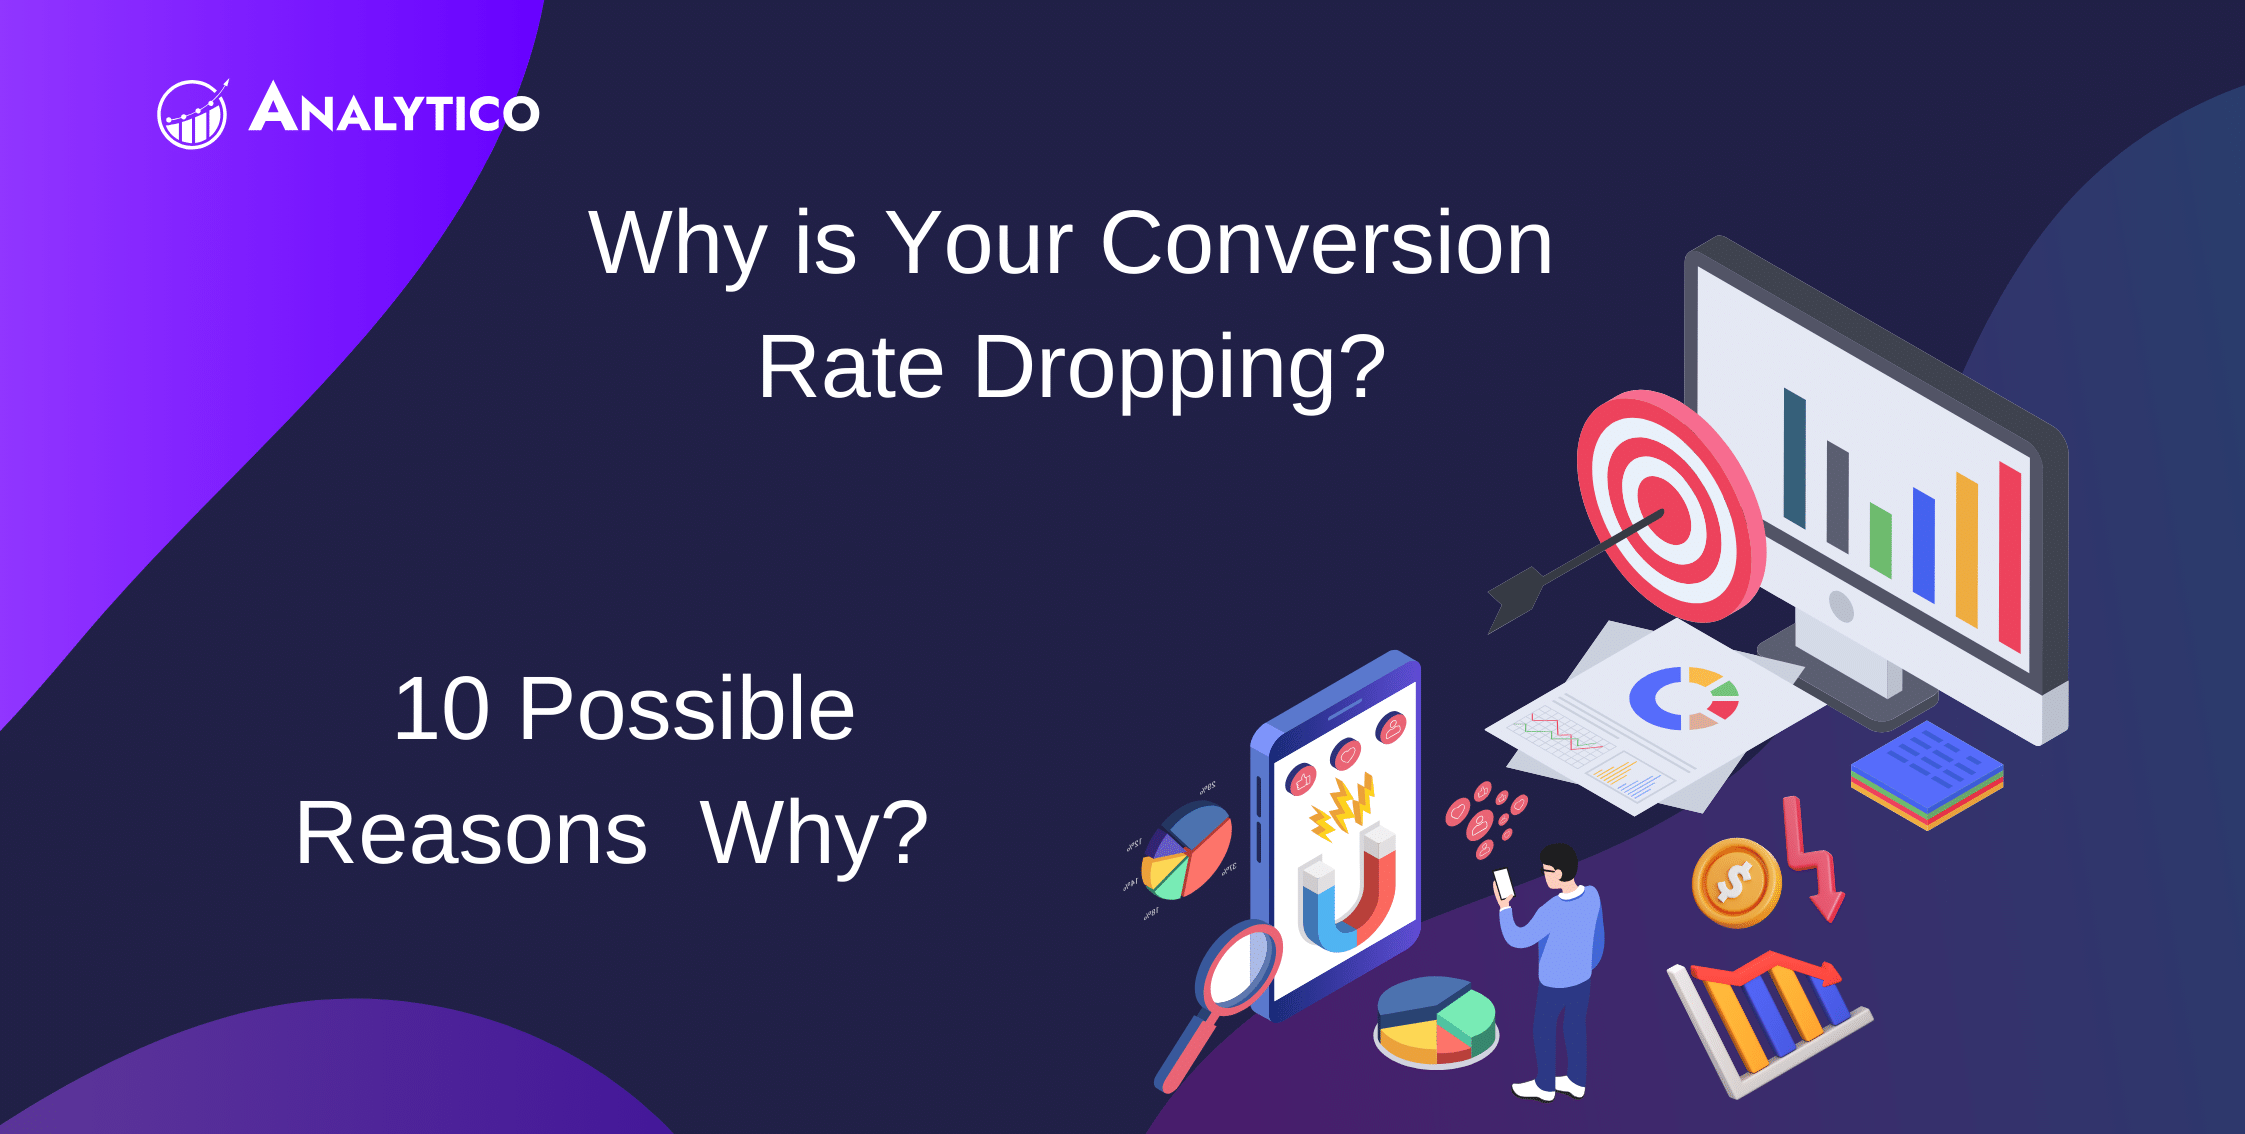 Why is your Conversion Rate Dropping? 10 Possible Reasons.